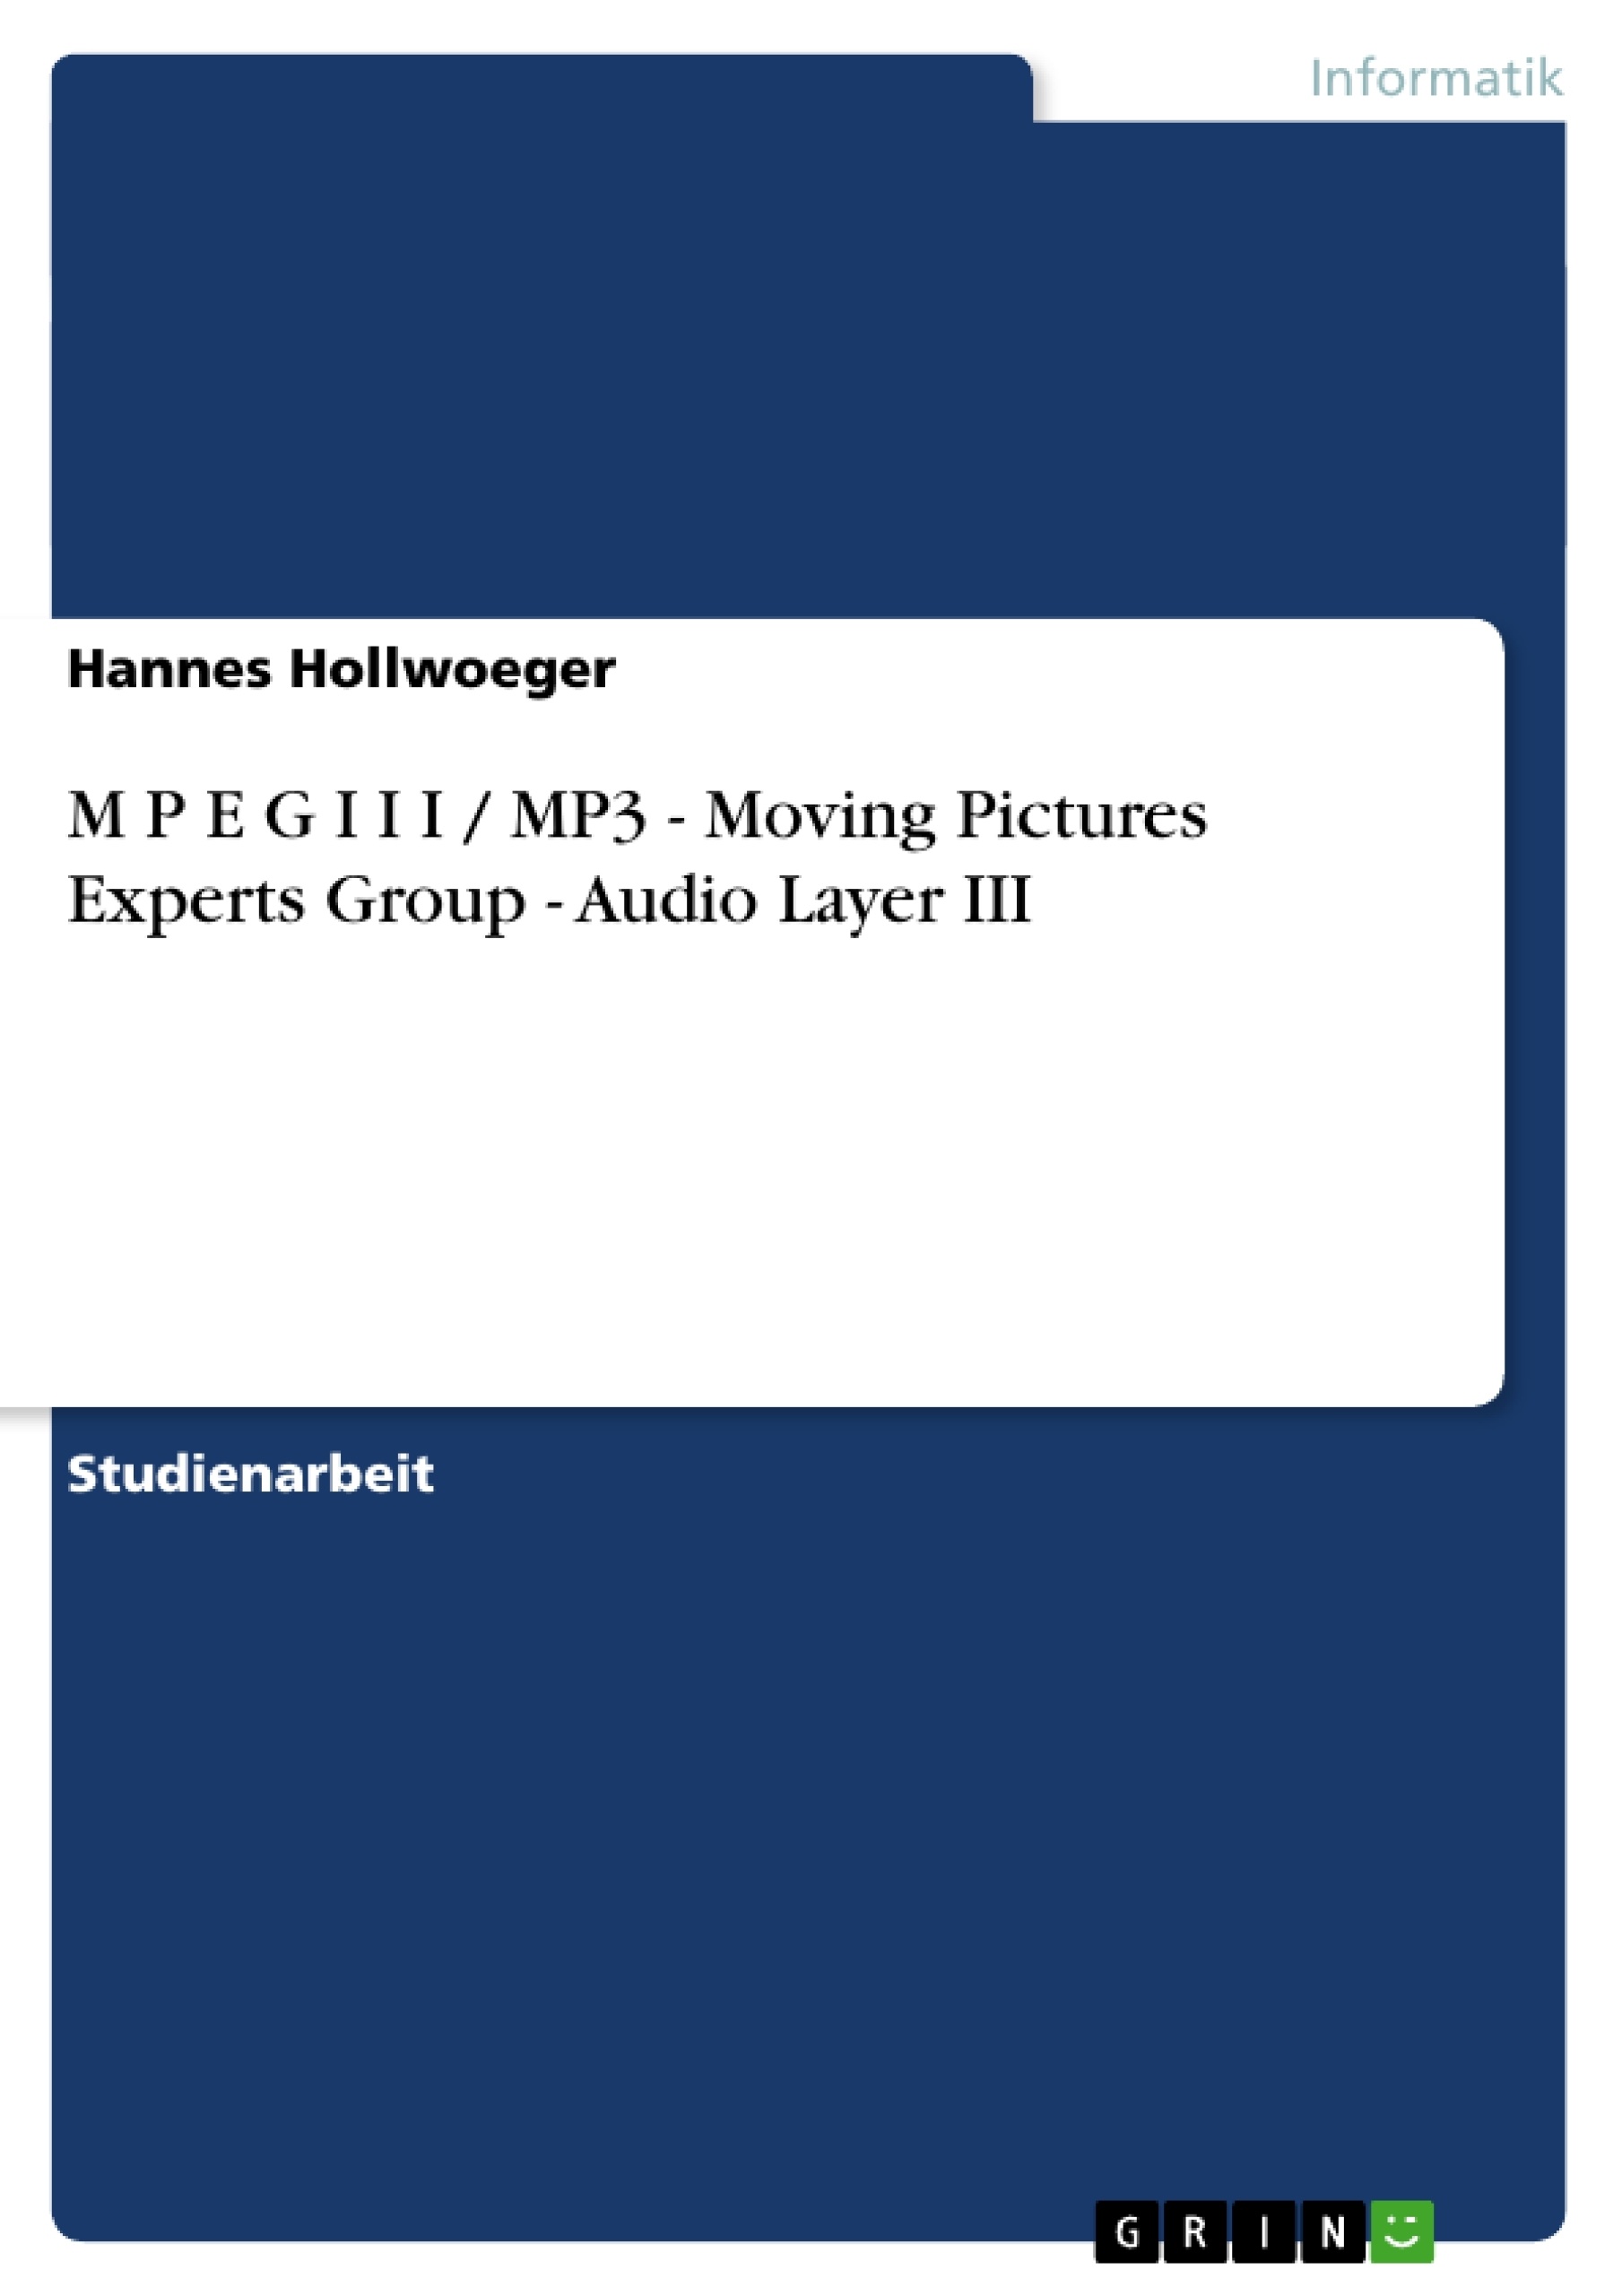 Título: M P E G I I I / MP3 - Moving Pictures Experts Group - Audio Layer III